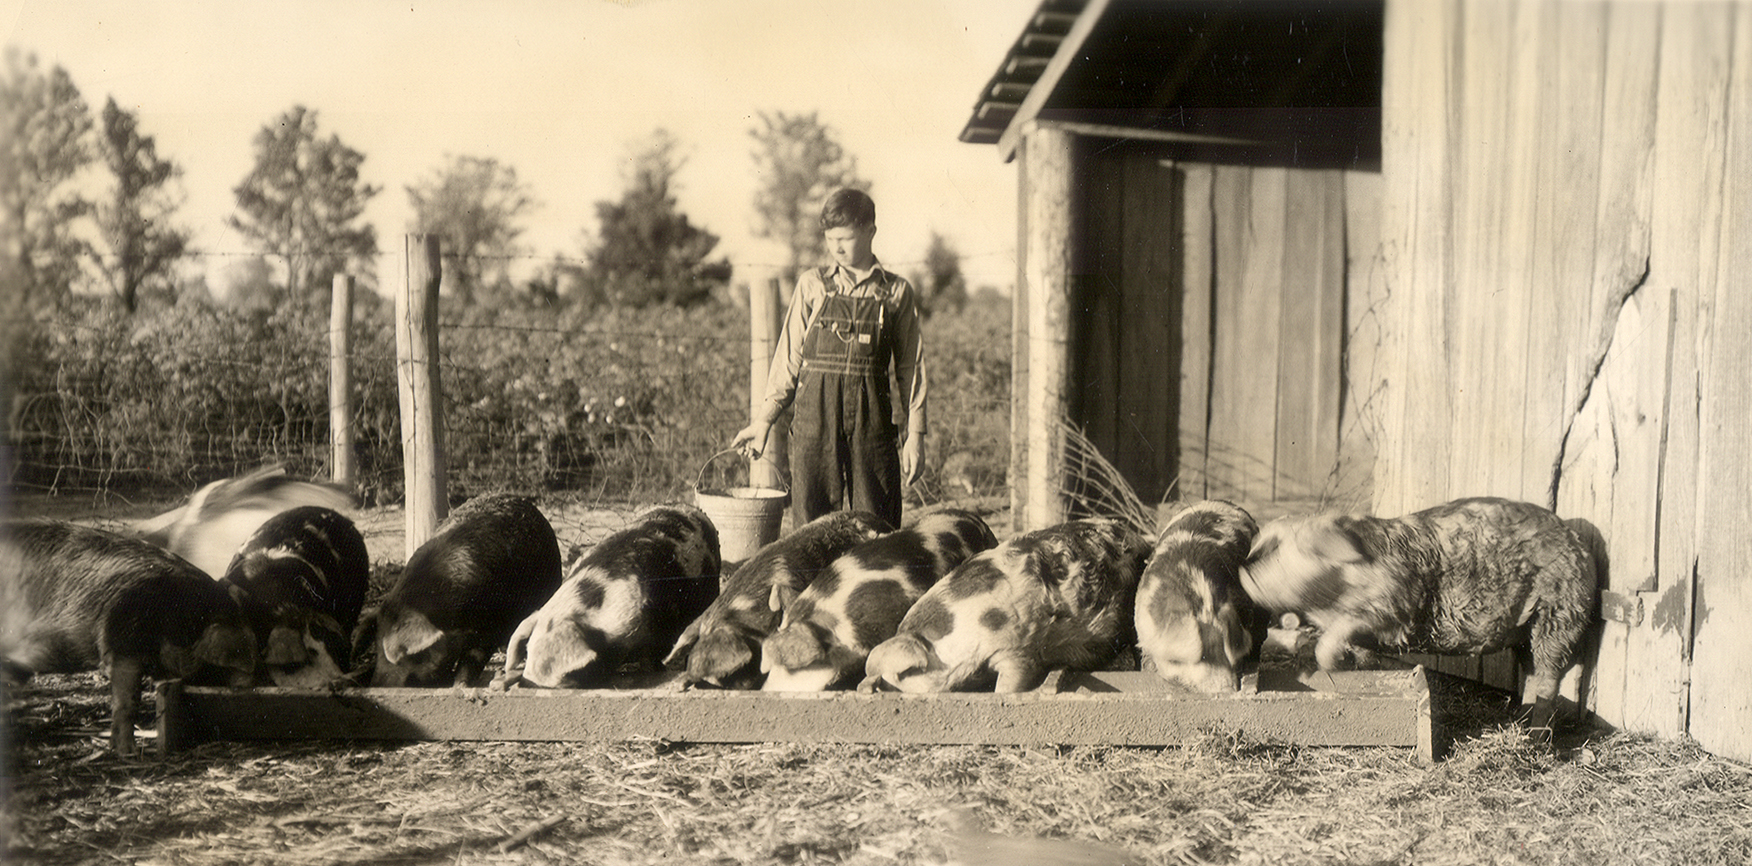 A boy working with the Arkansas Cooperative Extension Service feeds the hogs he is raising for competition. From the 1940 University of Wisconsin thesis, A History of the Agricultural Extension Service in Arkansas by Mena Hogan, page 109. The original manuscript of the thesis is available in the University of Arkansas Libraries Special Collections.